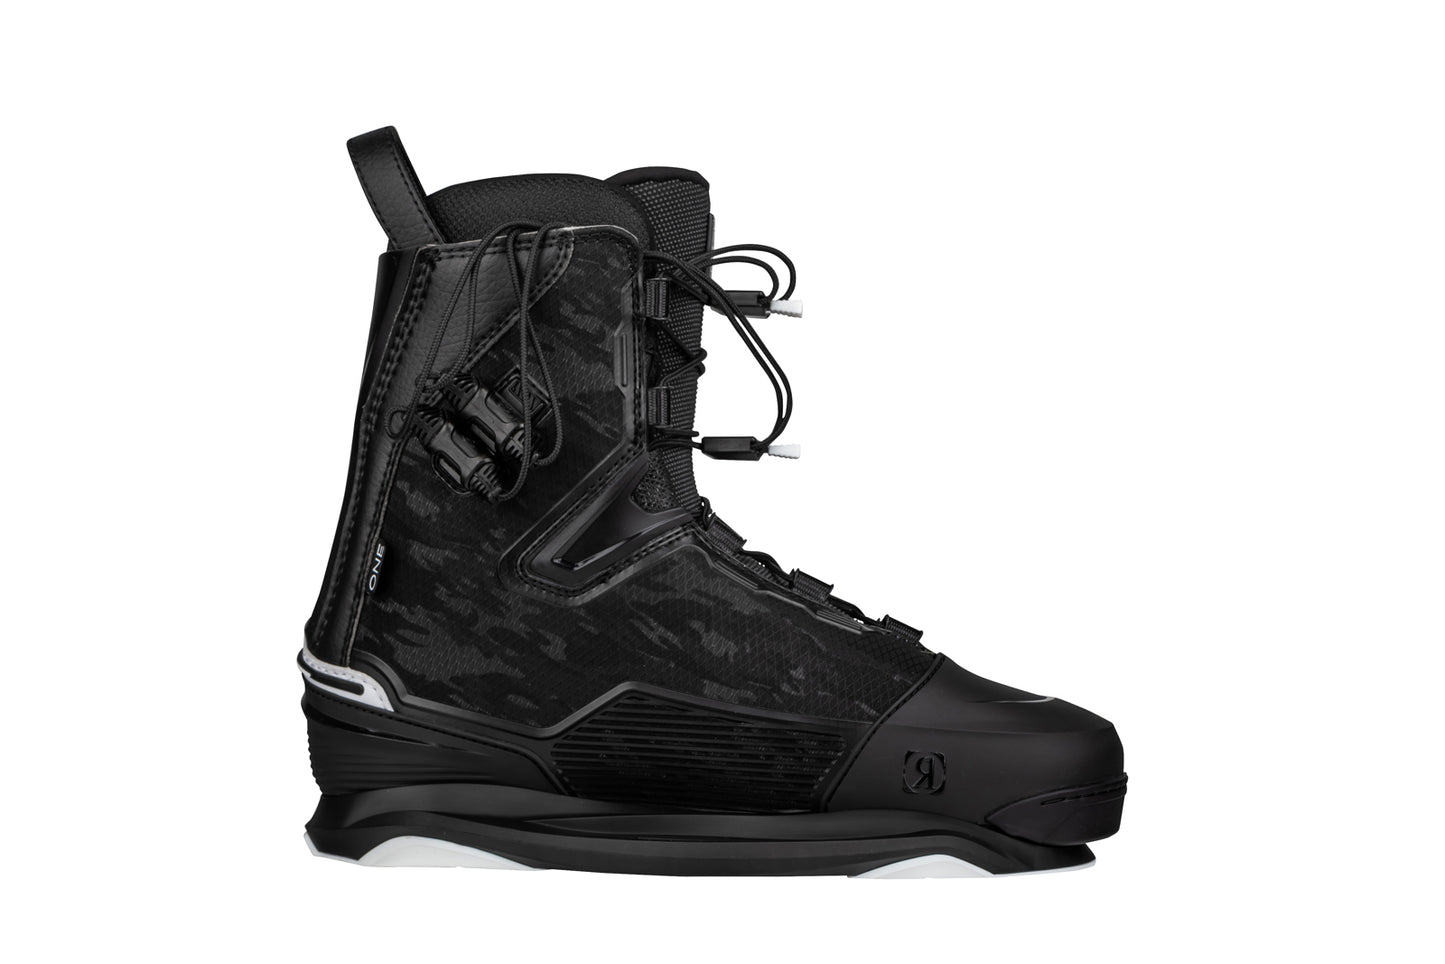 RONIX 2022 One Boot